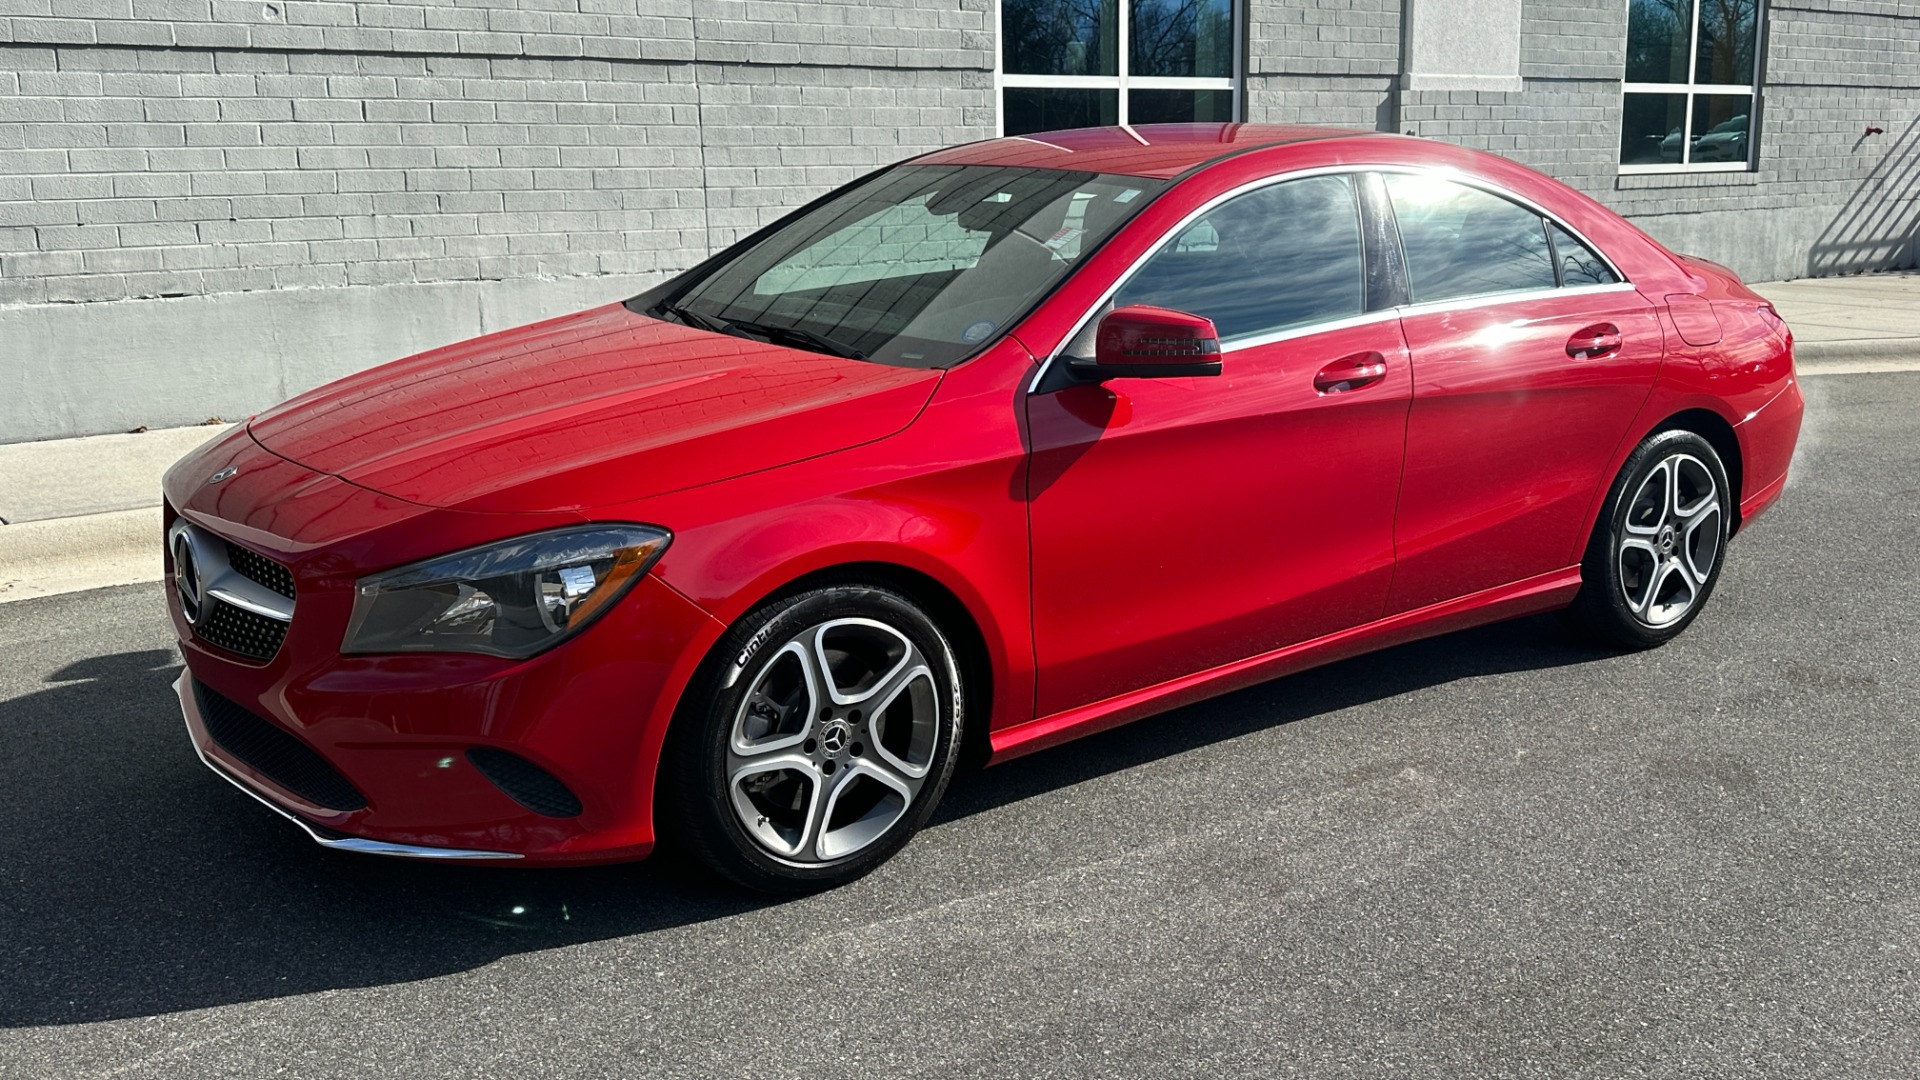 Used 2019 Mercedes-Benz CLA CLA 250 / APPLE CARPLAY / 17IN WHEELS / COMFORT SUSPENSION / BLINDSPOT for sale $27,995 at Formula Imports in Charlotte NC 28227 2